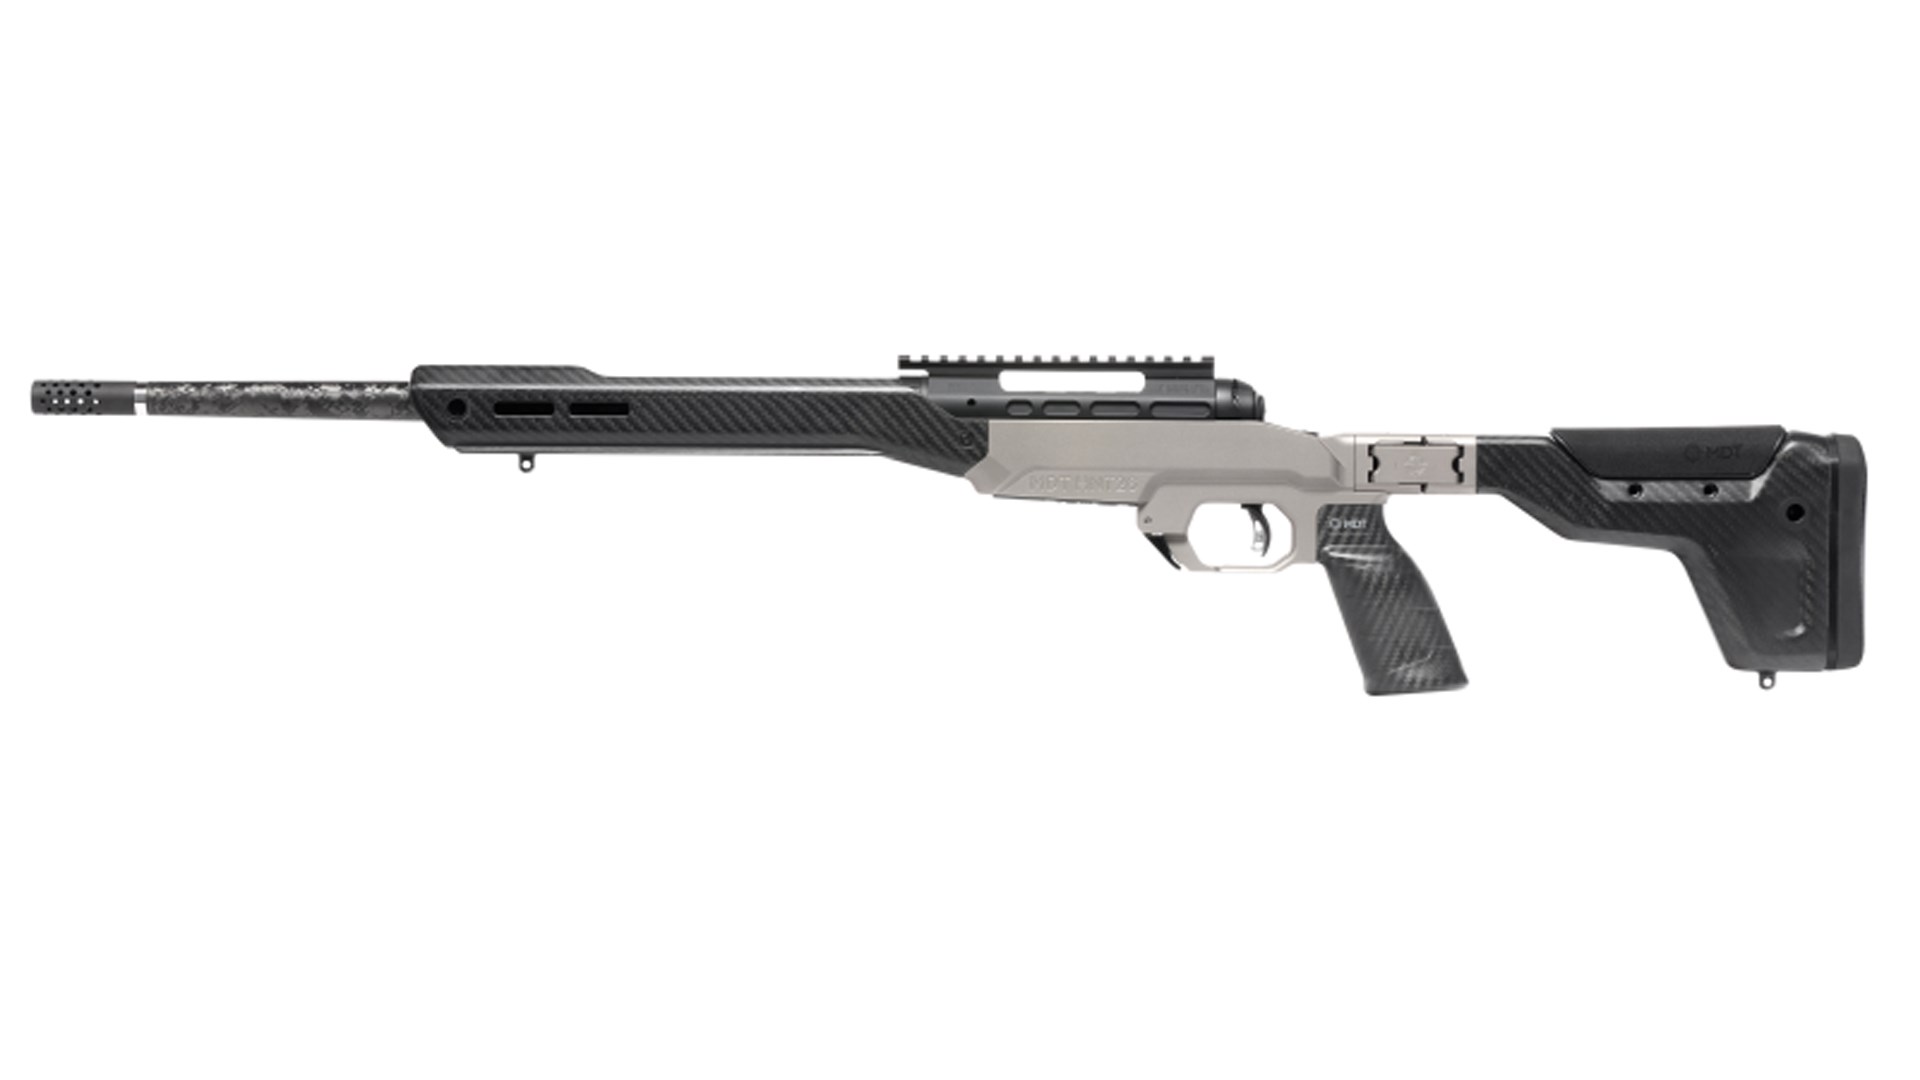 Left side of the 110 Ultralite Elite chassis rifle.